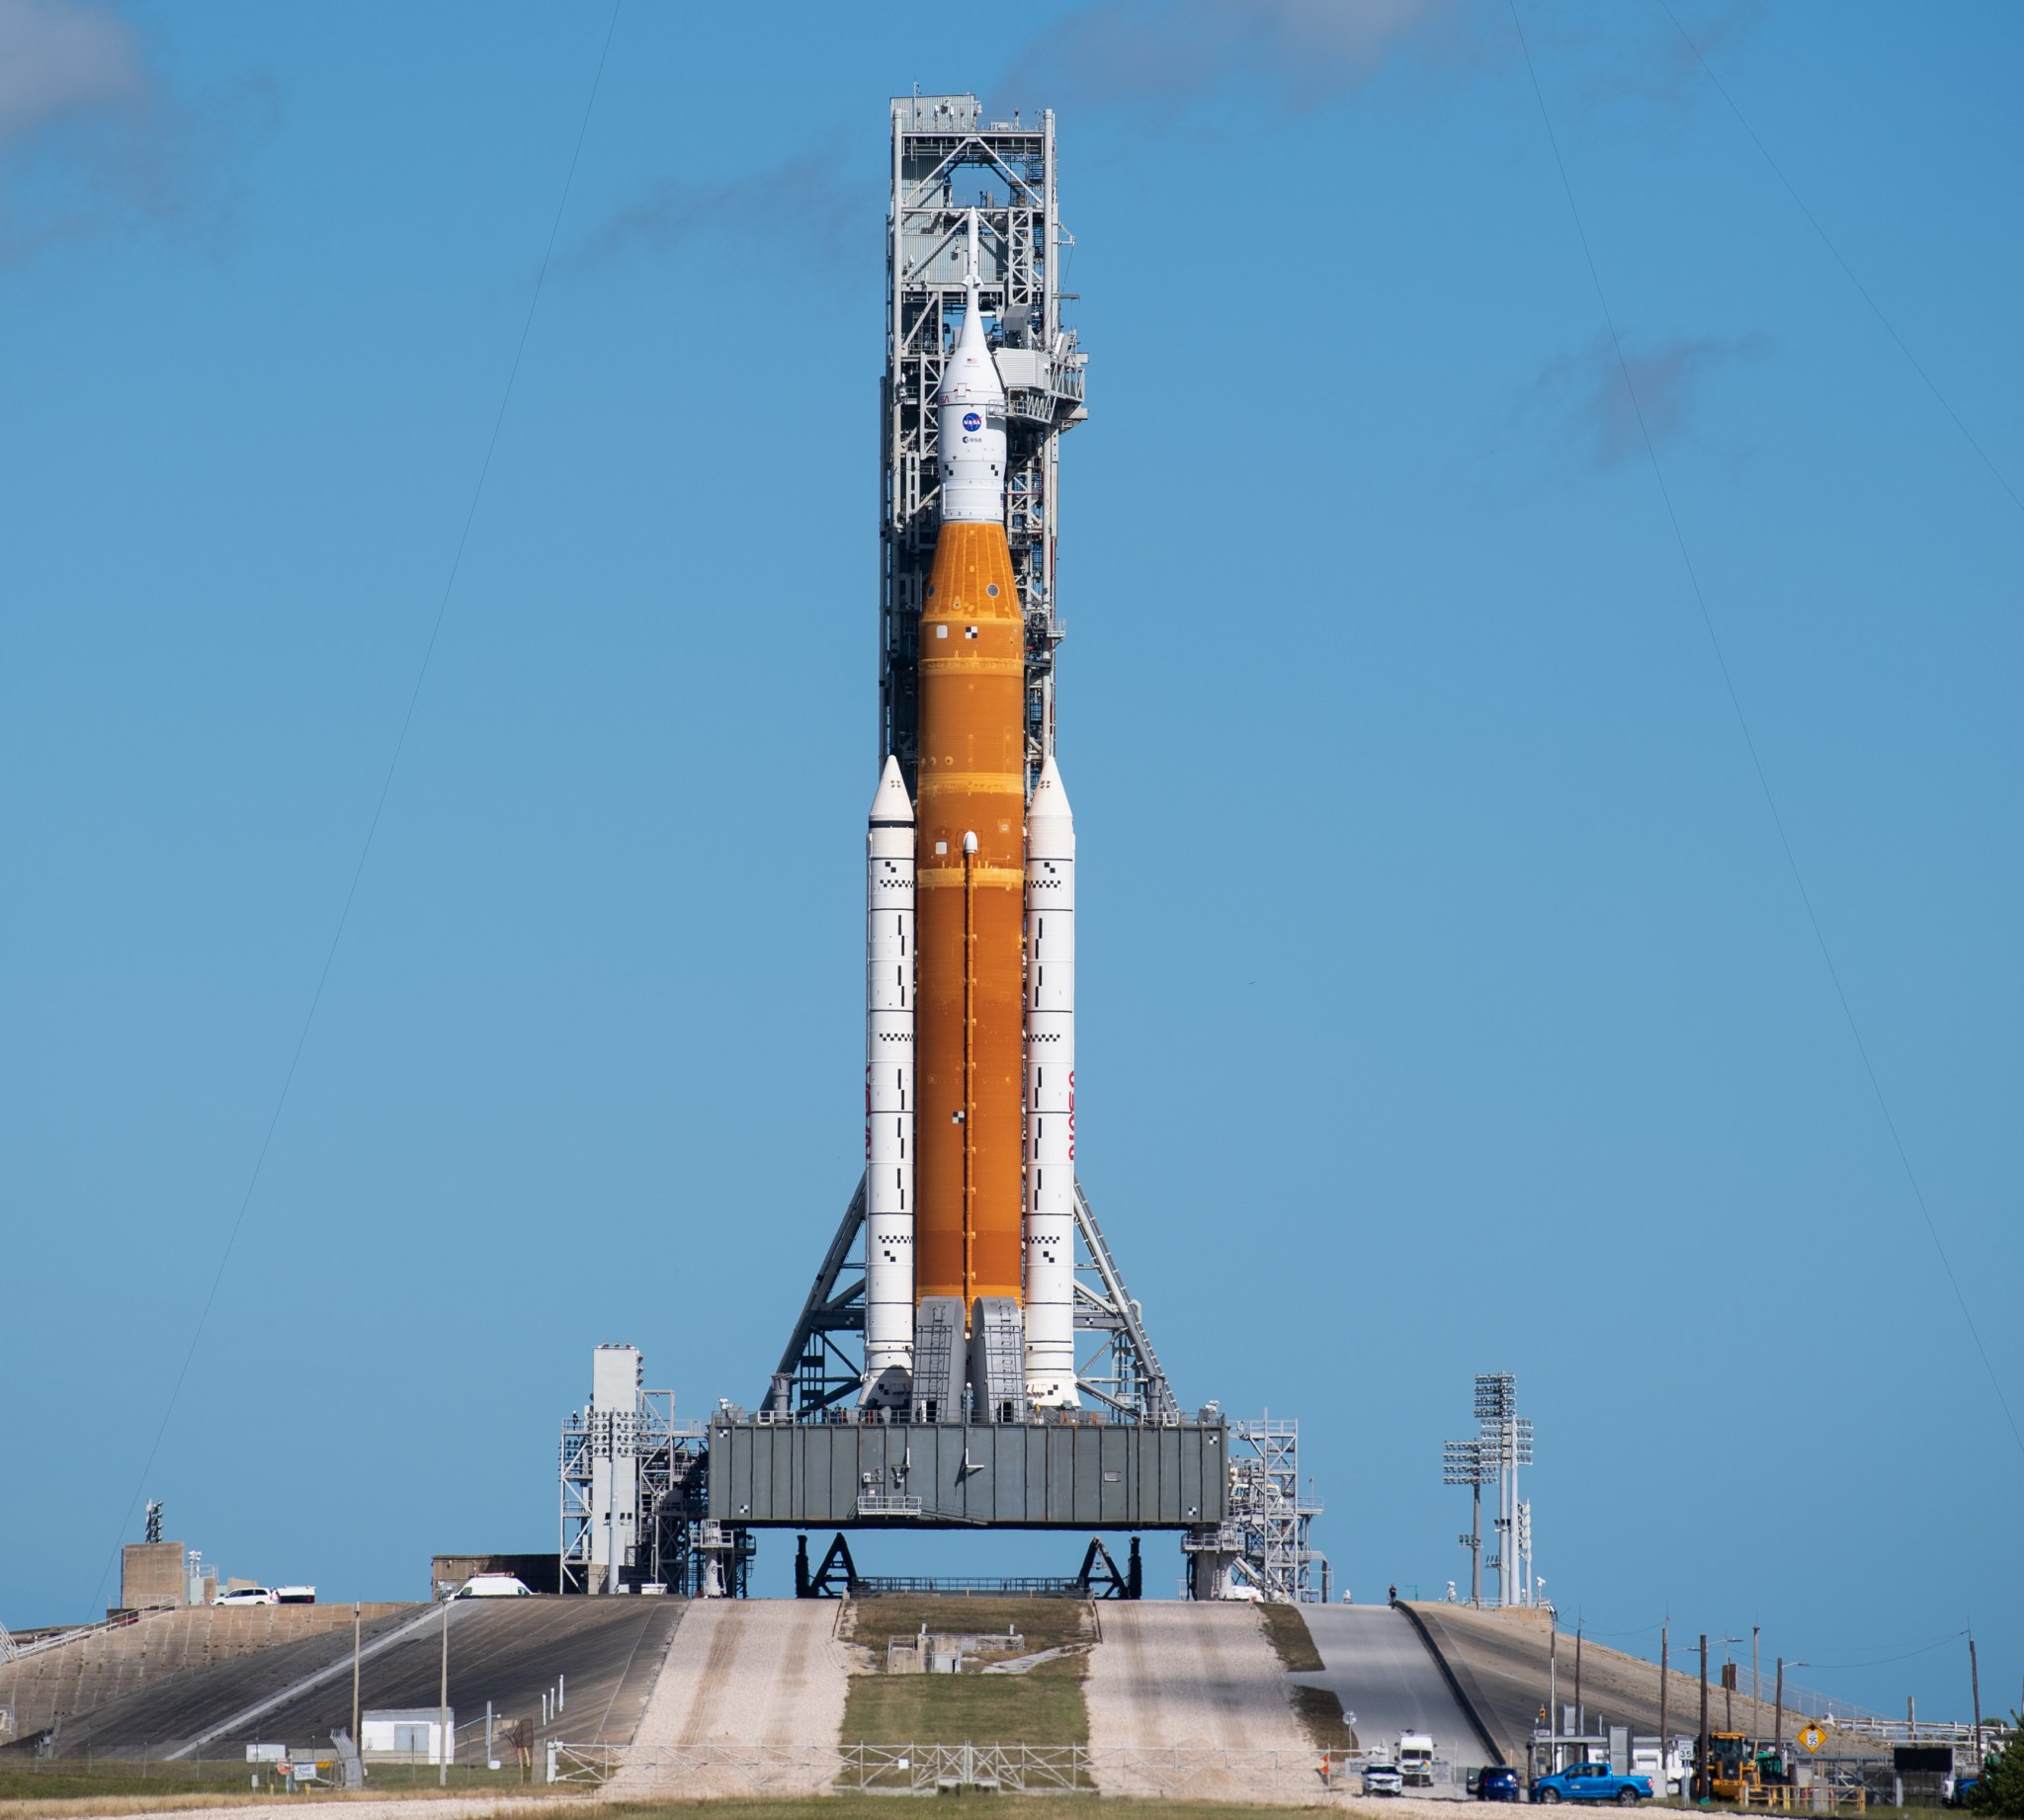 NASA’s Space Launch System (SLS) rocket with the Orion spacecraft aboard is seen atop the mobile launcher at Launch Pad 39B, Friday, Nov. 11, 2022.